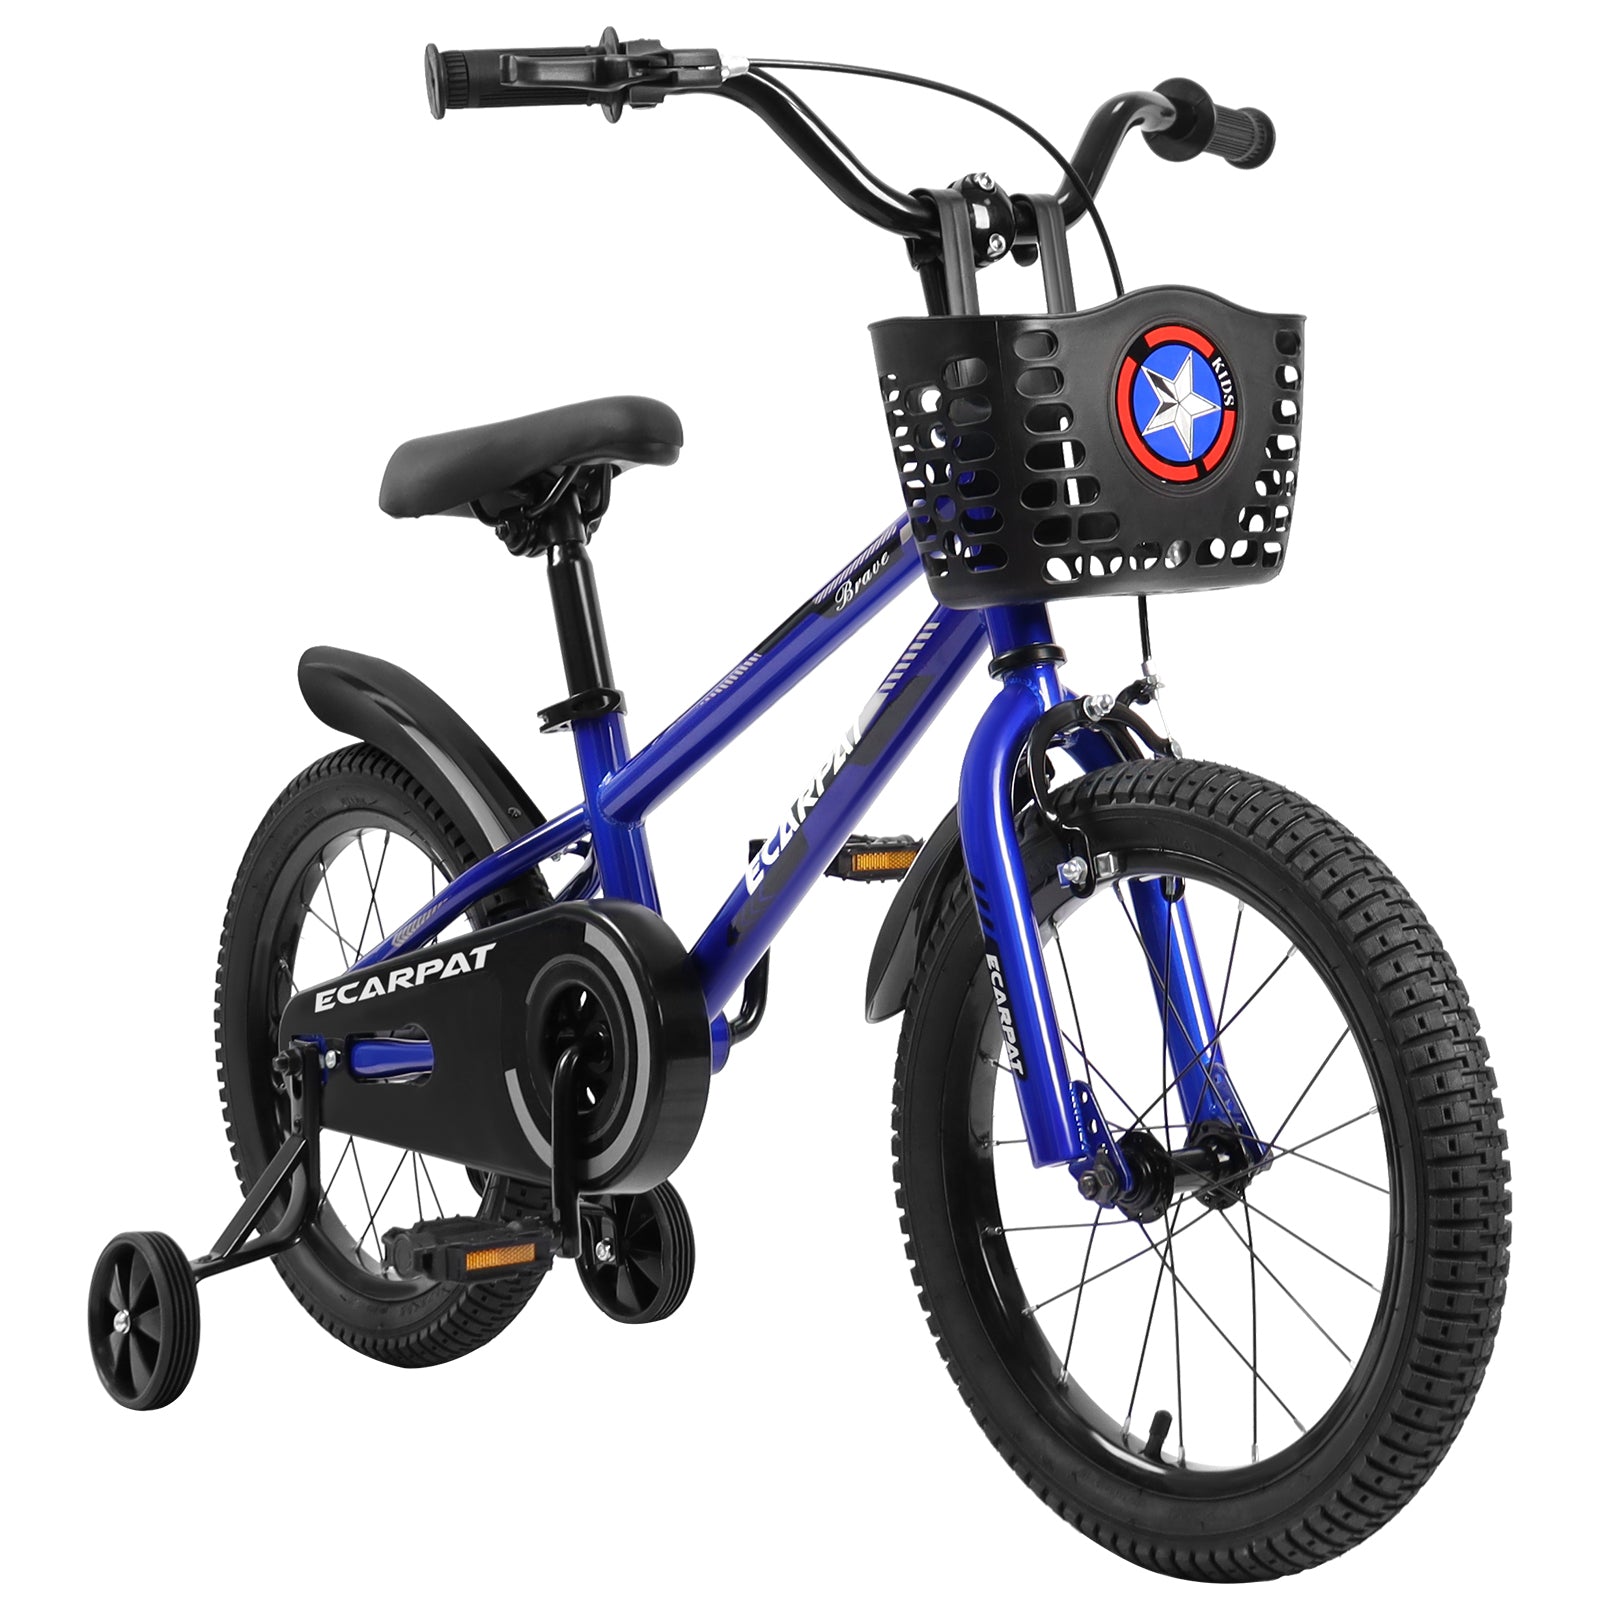 Kids-Bike--16-inch-for-Boys-&-Girls-with-Training-Wheels,--Freestyle-Kids'-Bicycle-with-Bell,Basket-and-fender.-